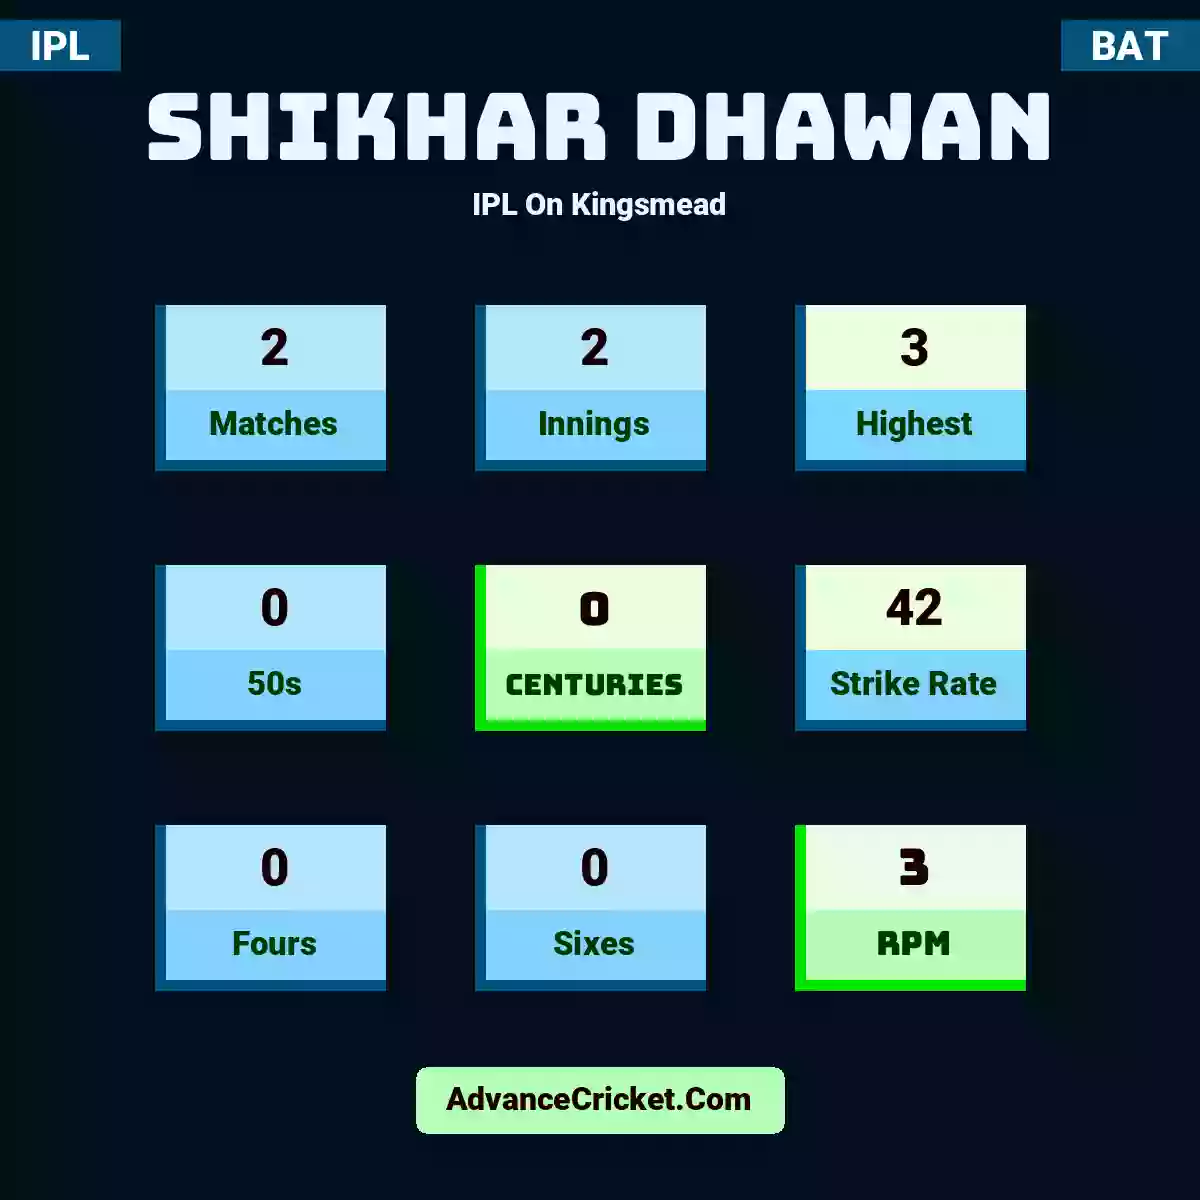 Shikhar Dhawan IPL  On Kingsmead, Shikhar Dhawan played 2 matches, scored 3 runs as highest, 0 half-centuries, and 0 centuries, with a strike rate of 42. S.Dhawan hit 0 fours and 0 sixes, with an RPM of 3.